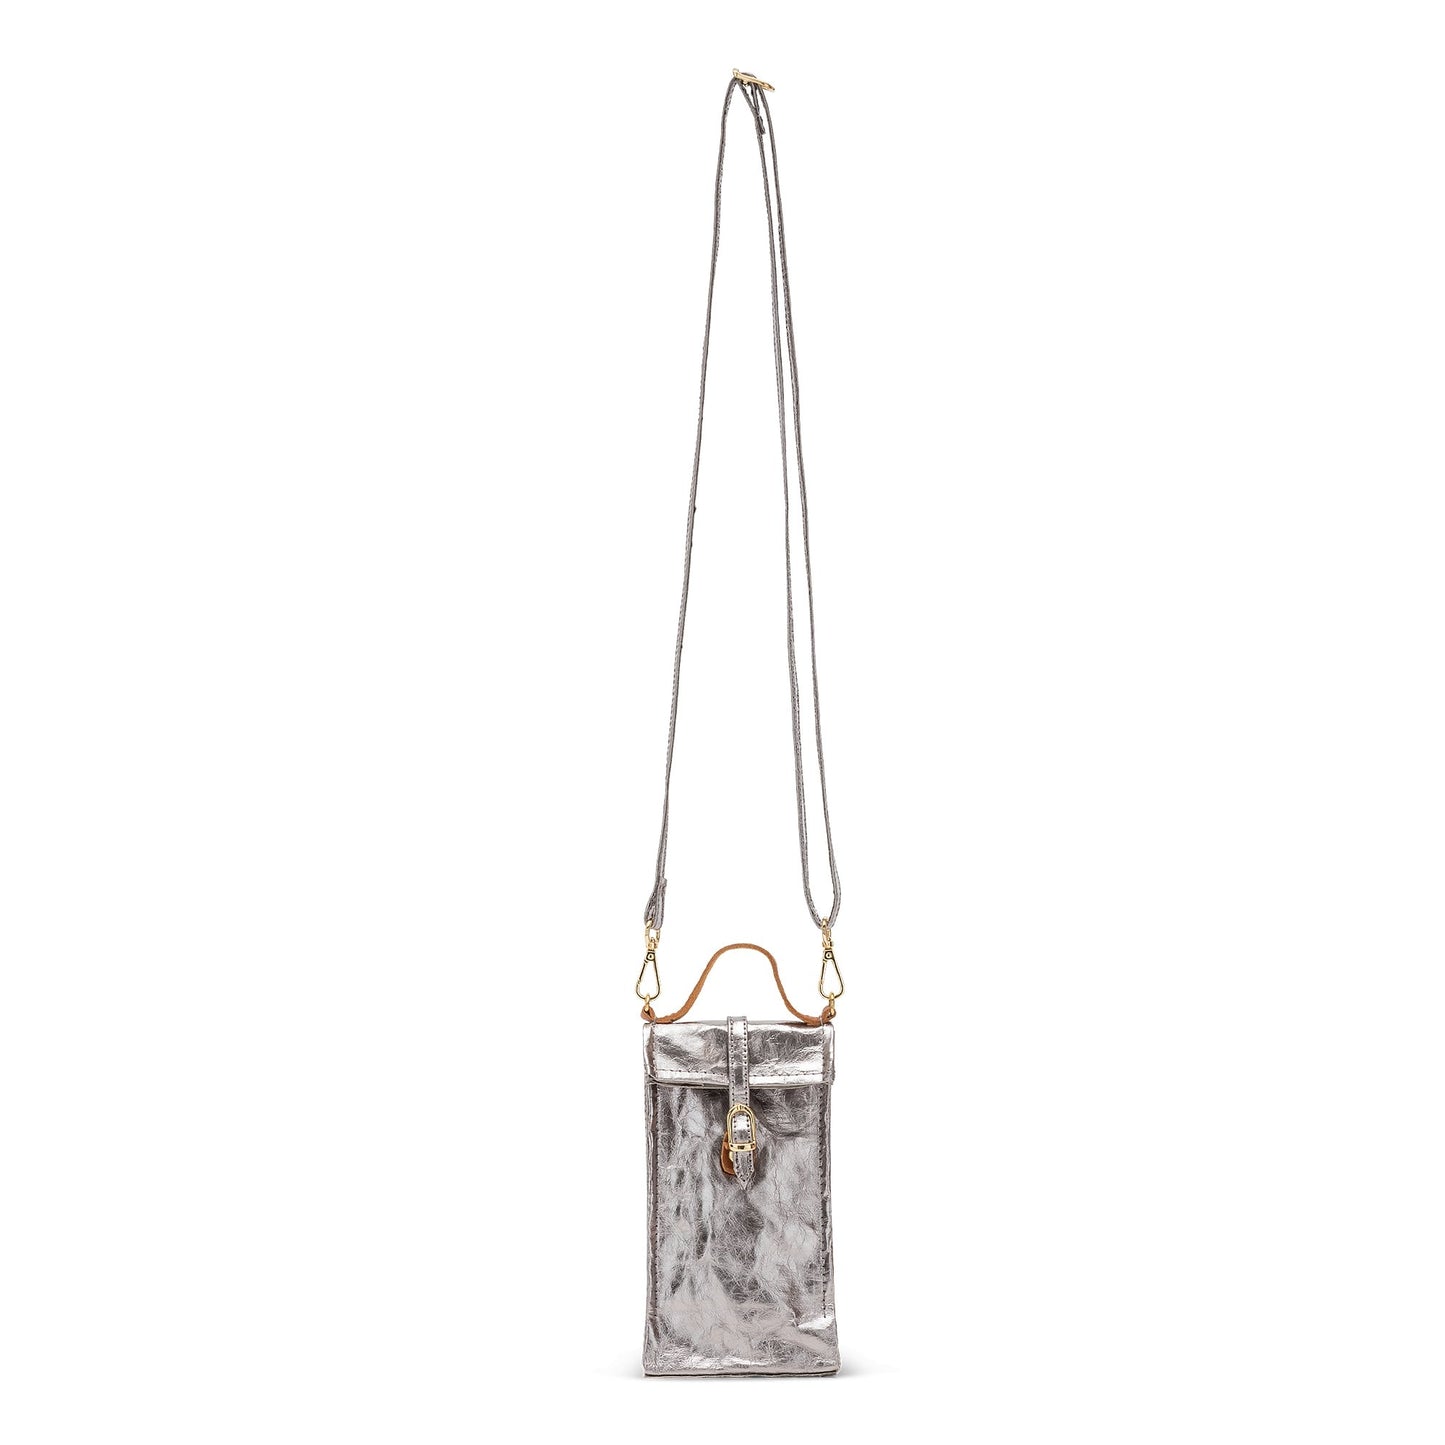 A washable paper phone pouch is shown from the front in metallic silver with a long strap and a brown top handle.